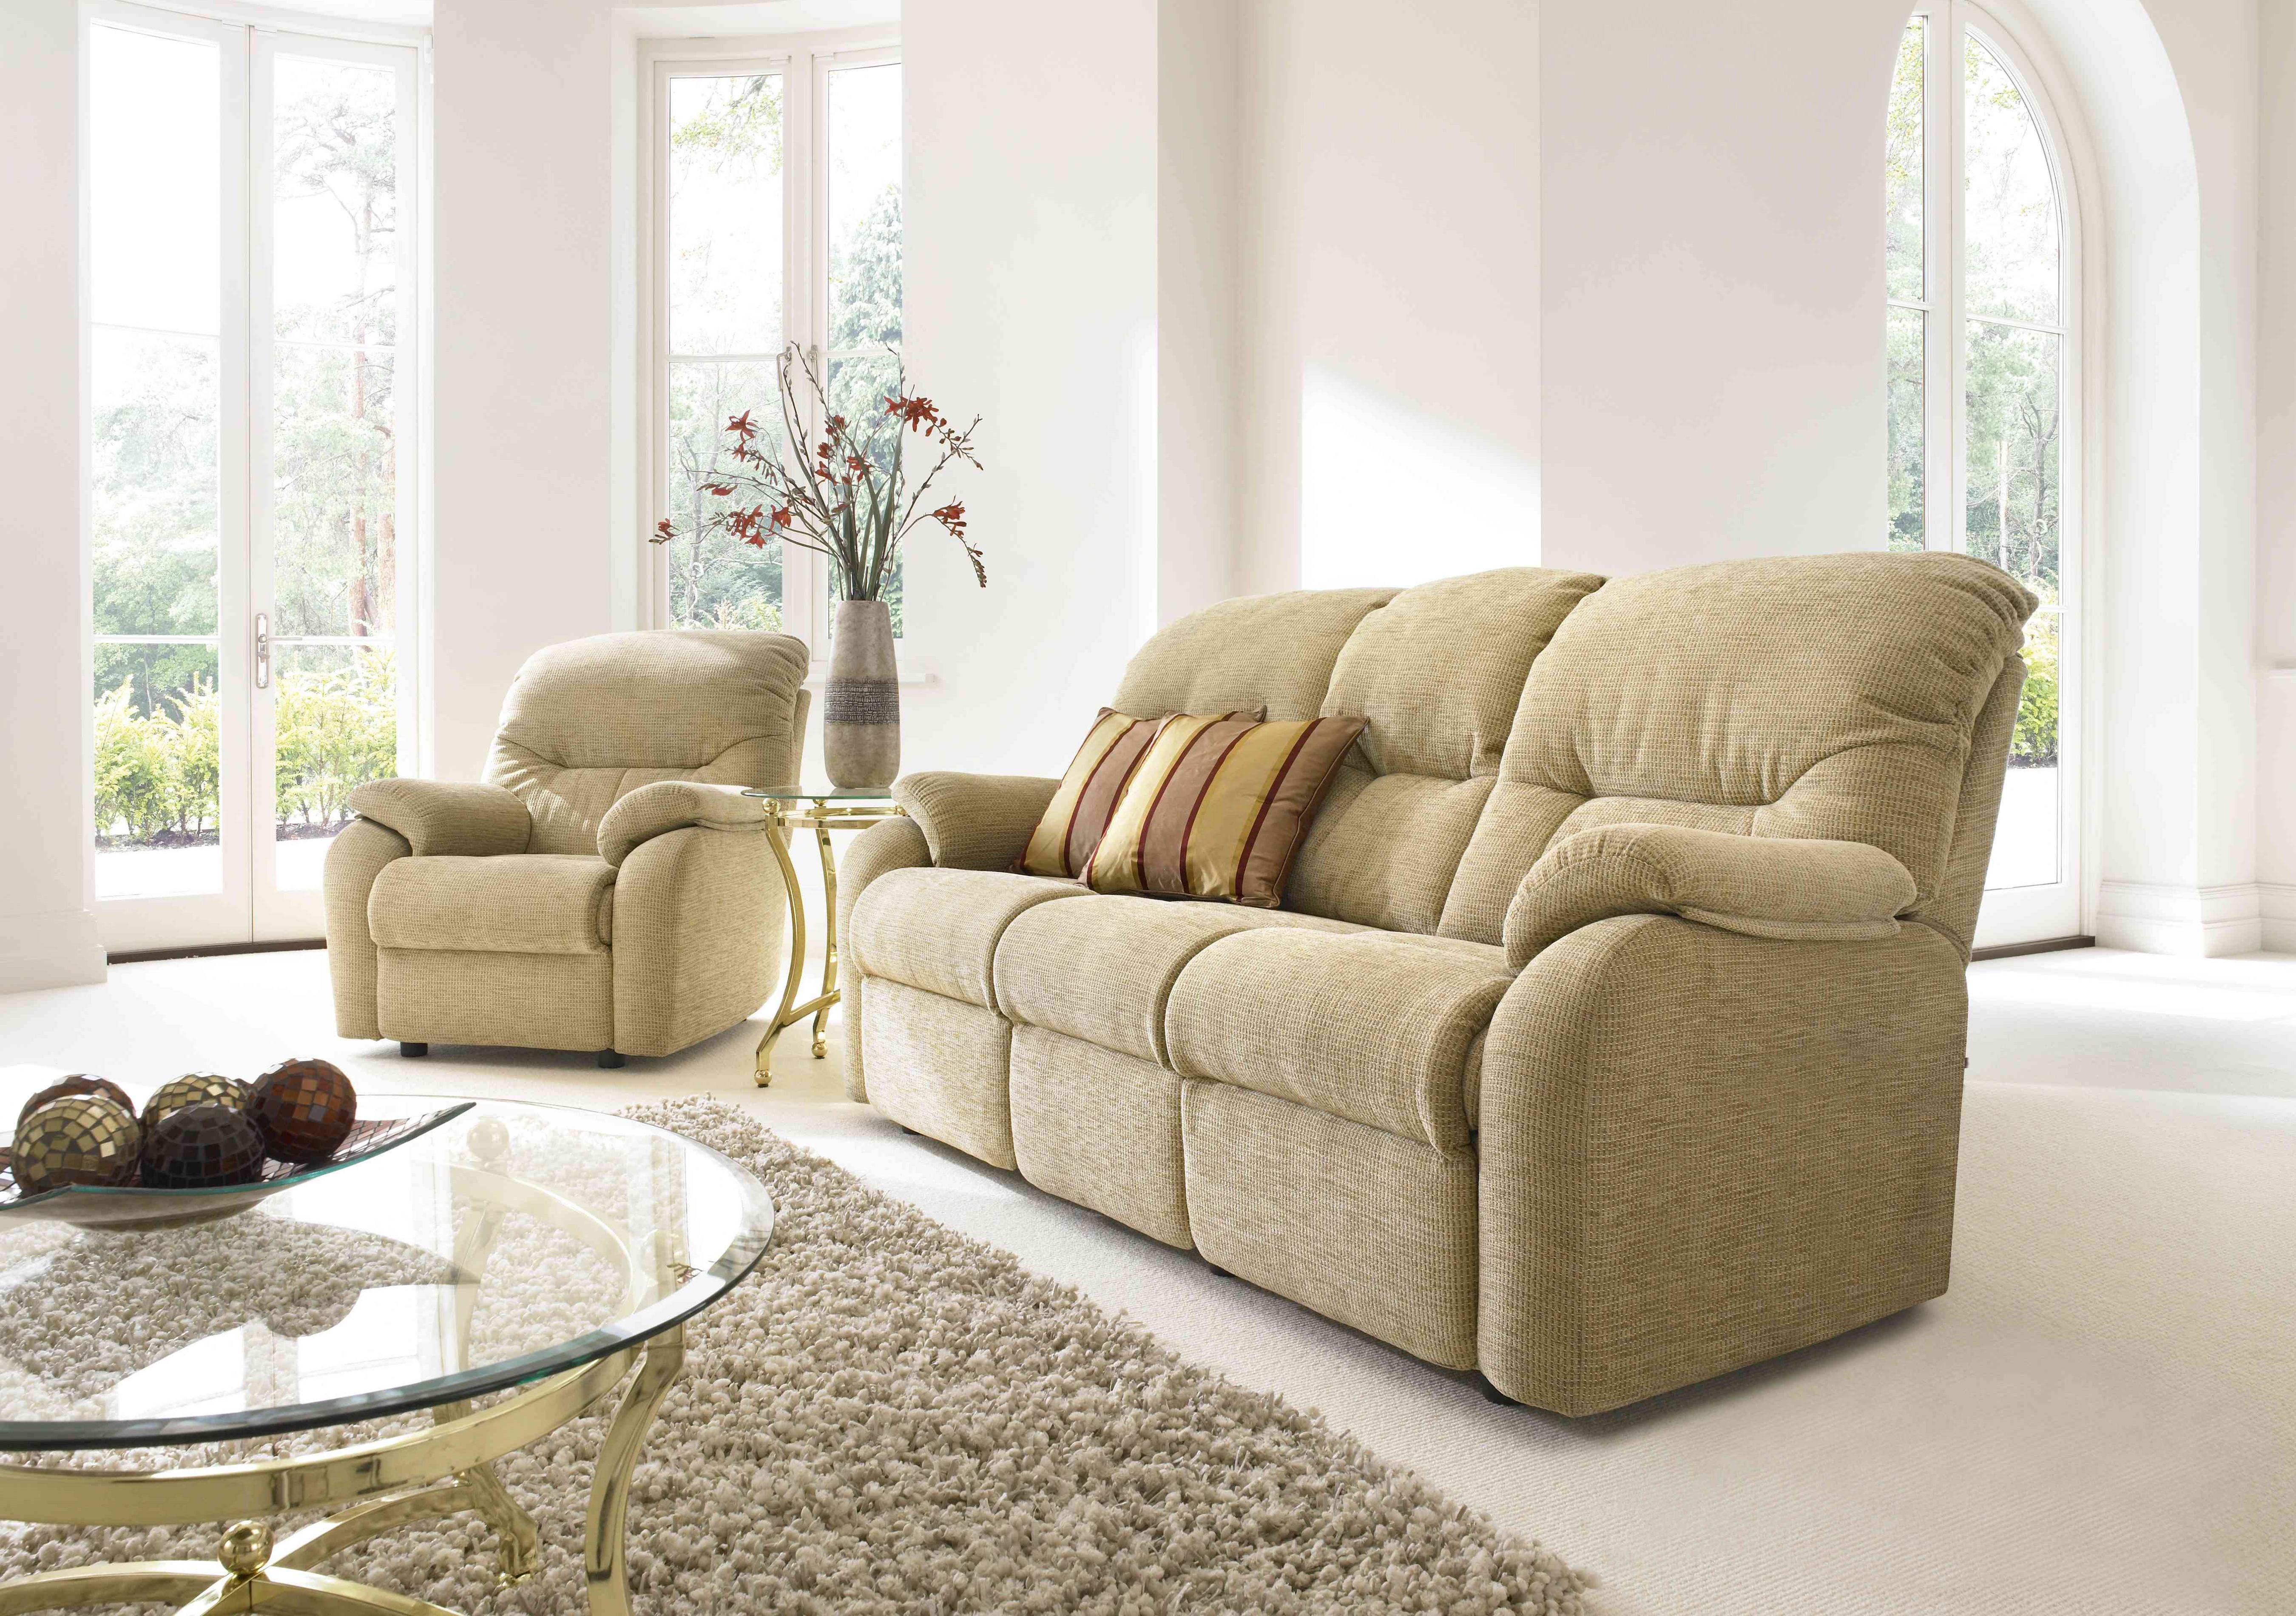 G Plan Recliner Sofas - Great Prices on Power Recliners 